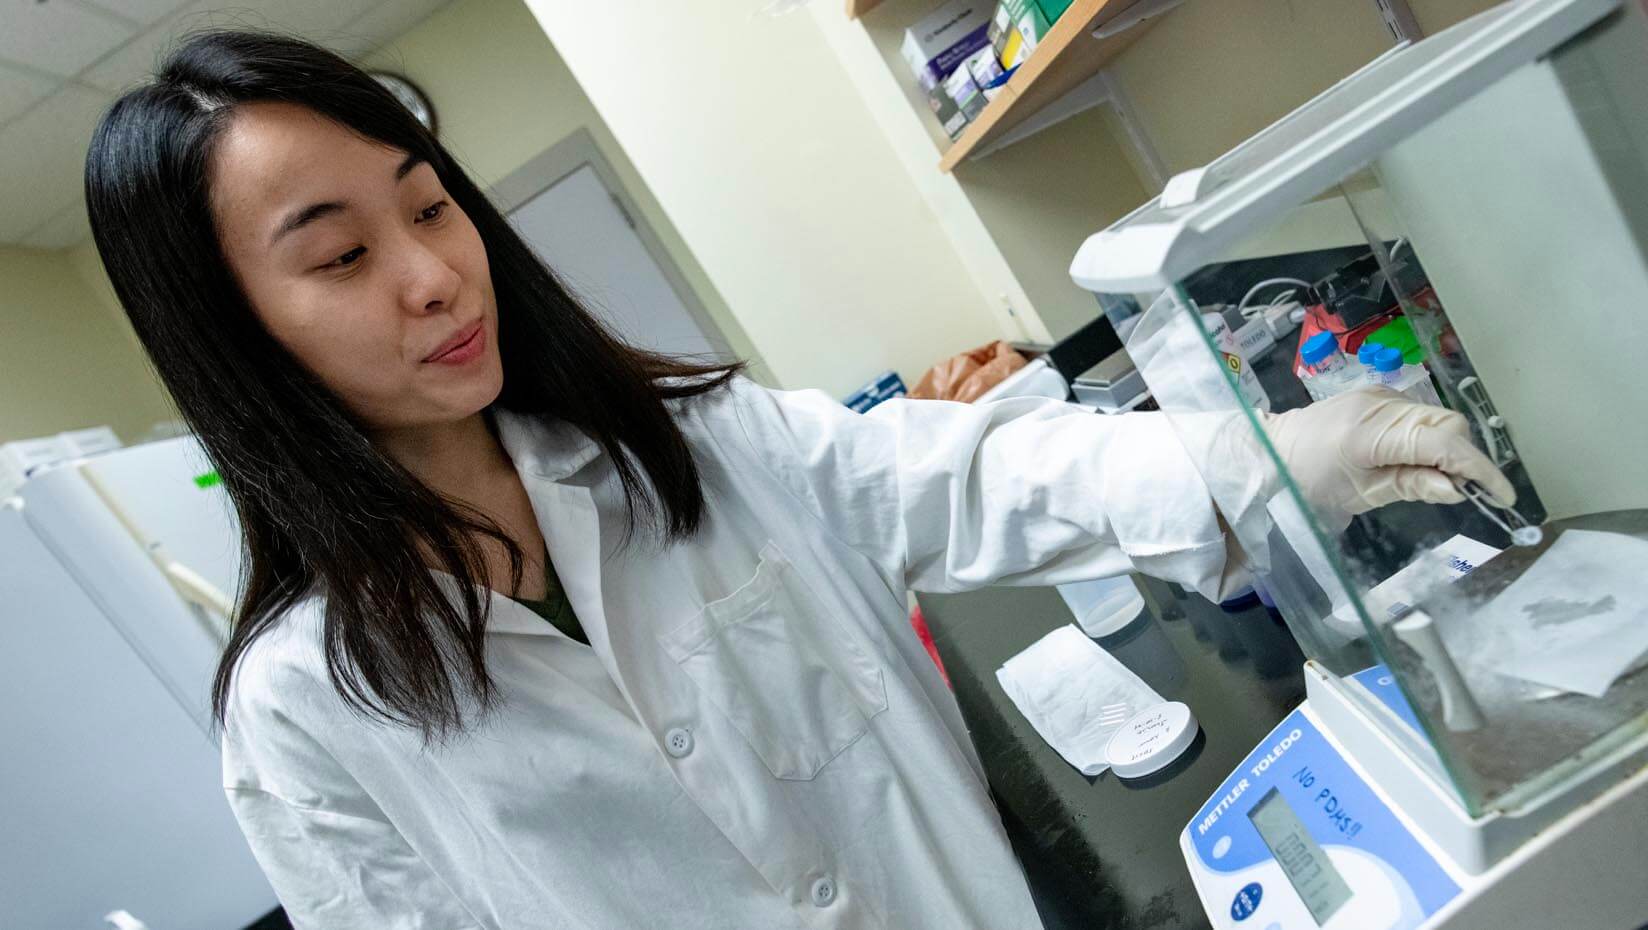 A graduate student conducts research in a lab